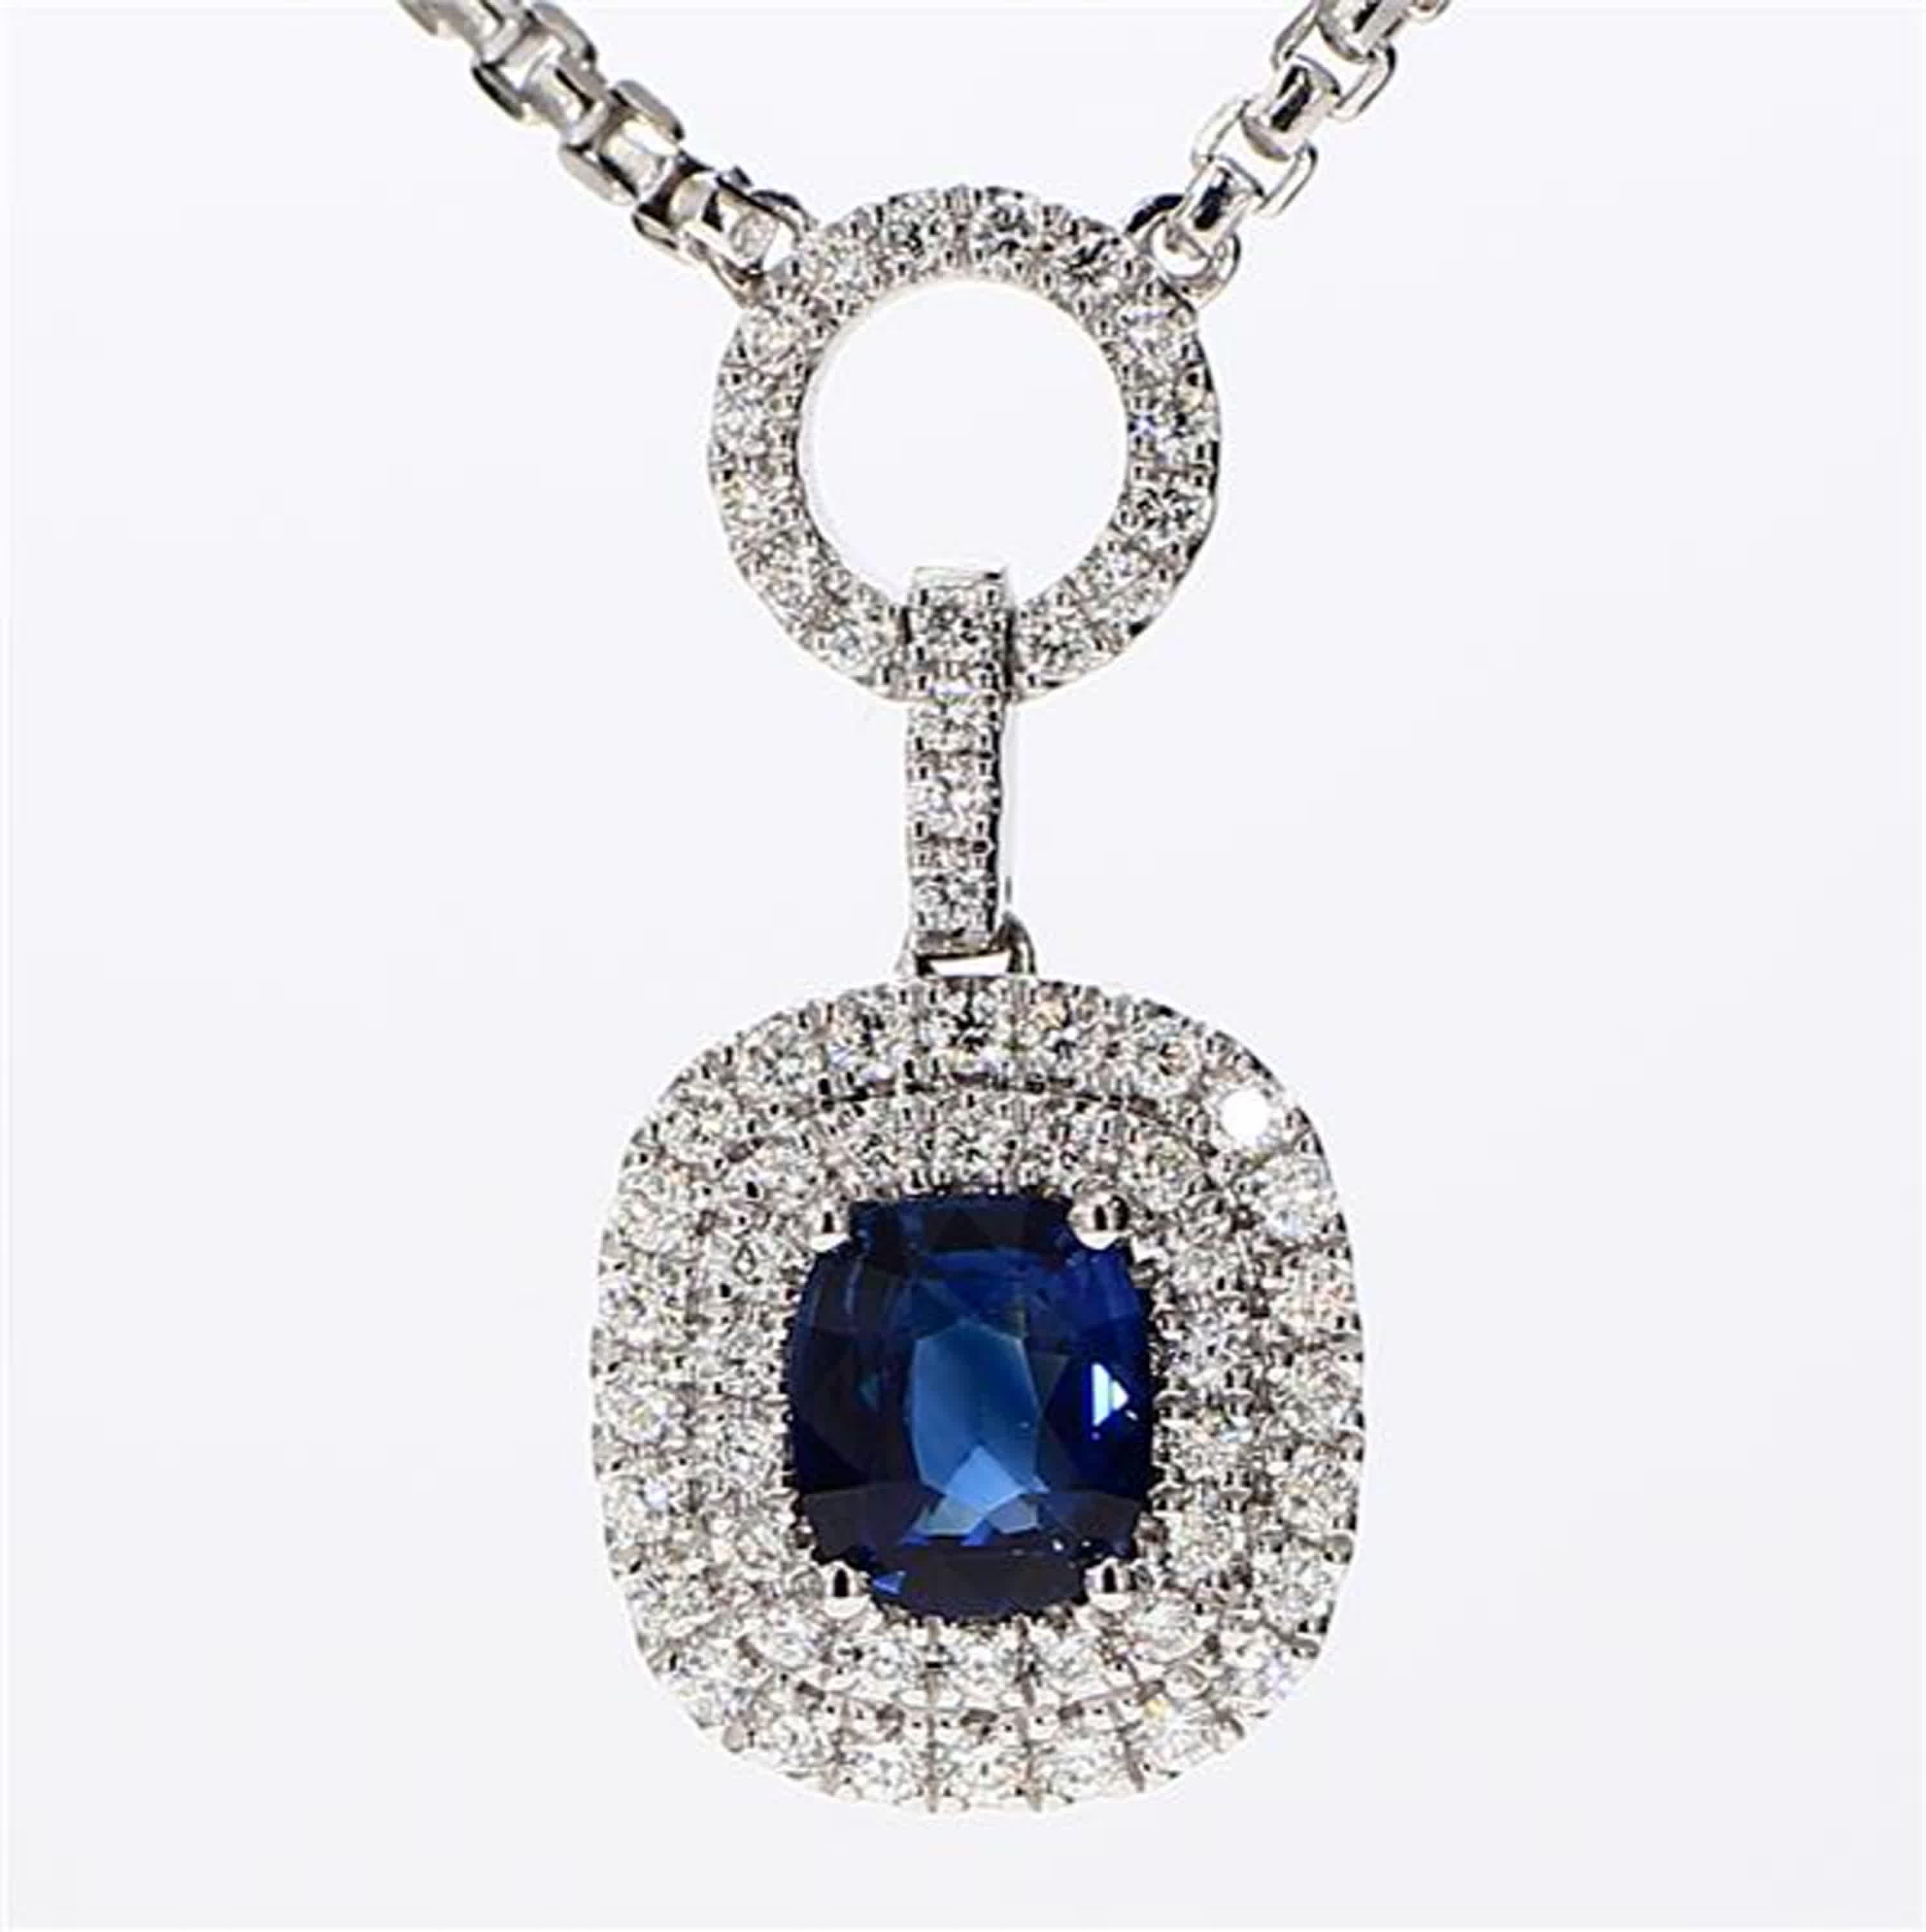 RareGemWorld's classic sapphire pendant. Mounted in a beautiful 18K White Gold setting with a natural cushion cut blue sapphire. The sapphire is surrounded by natural round white diamond melee. This pendant is guaranteed to impress and enhance your